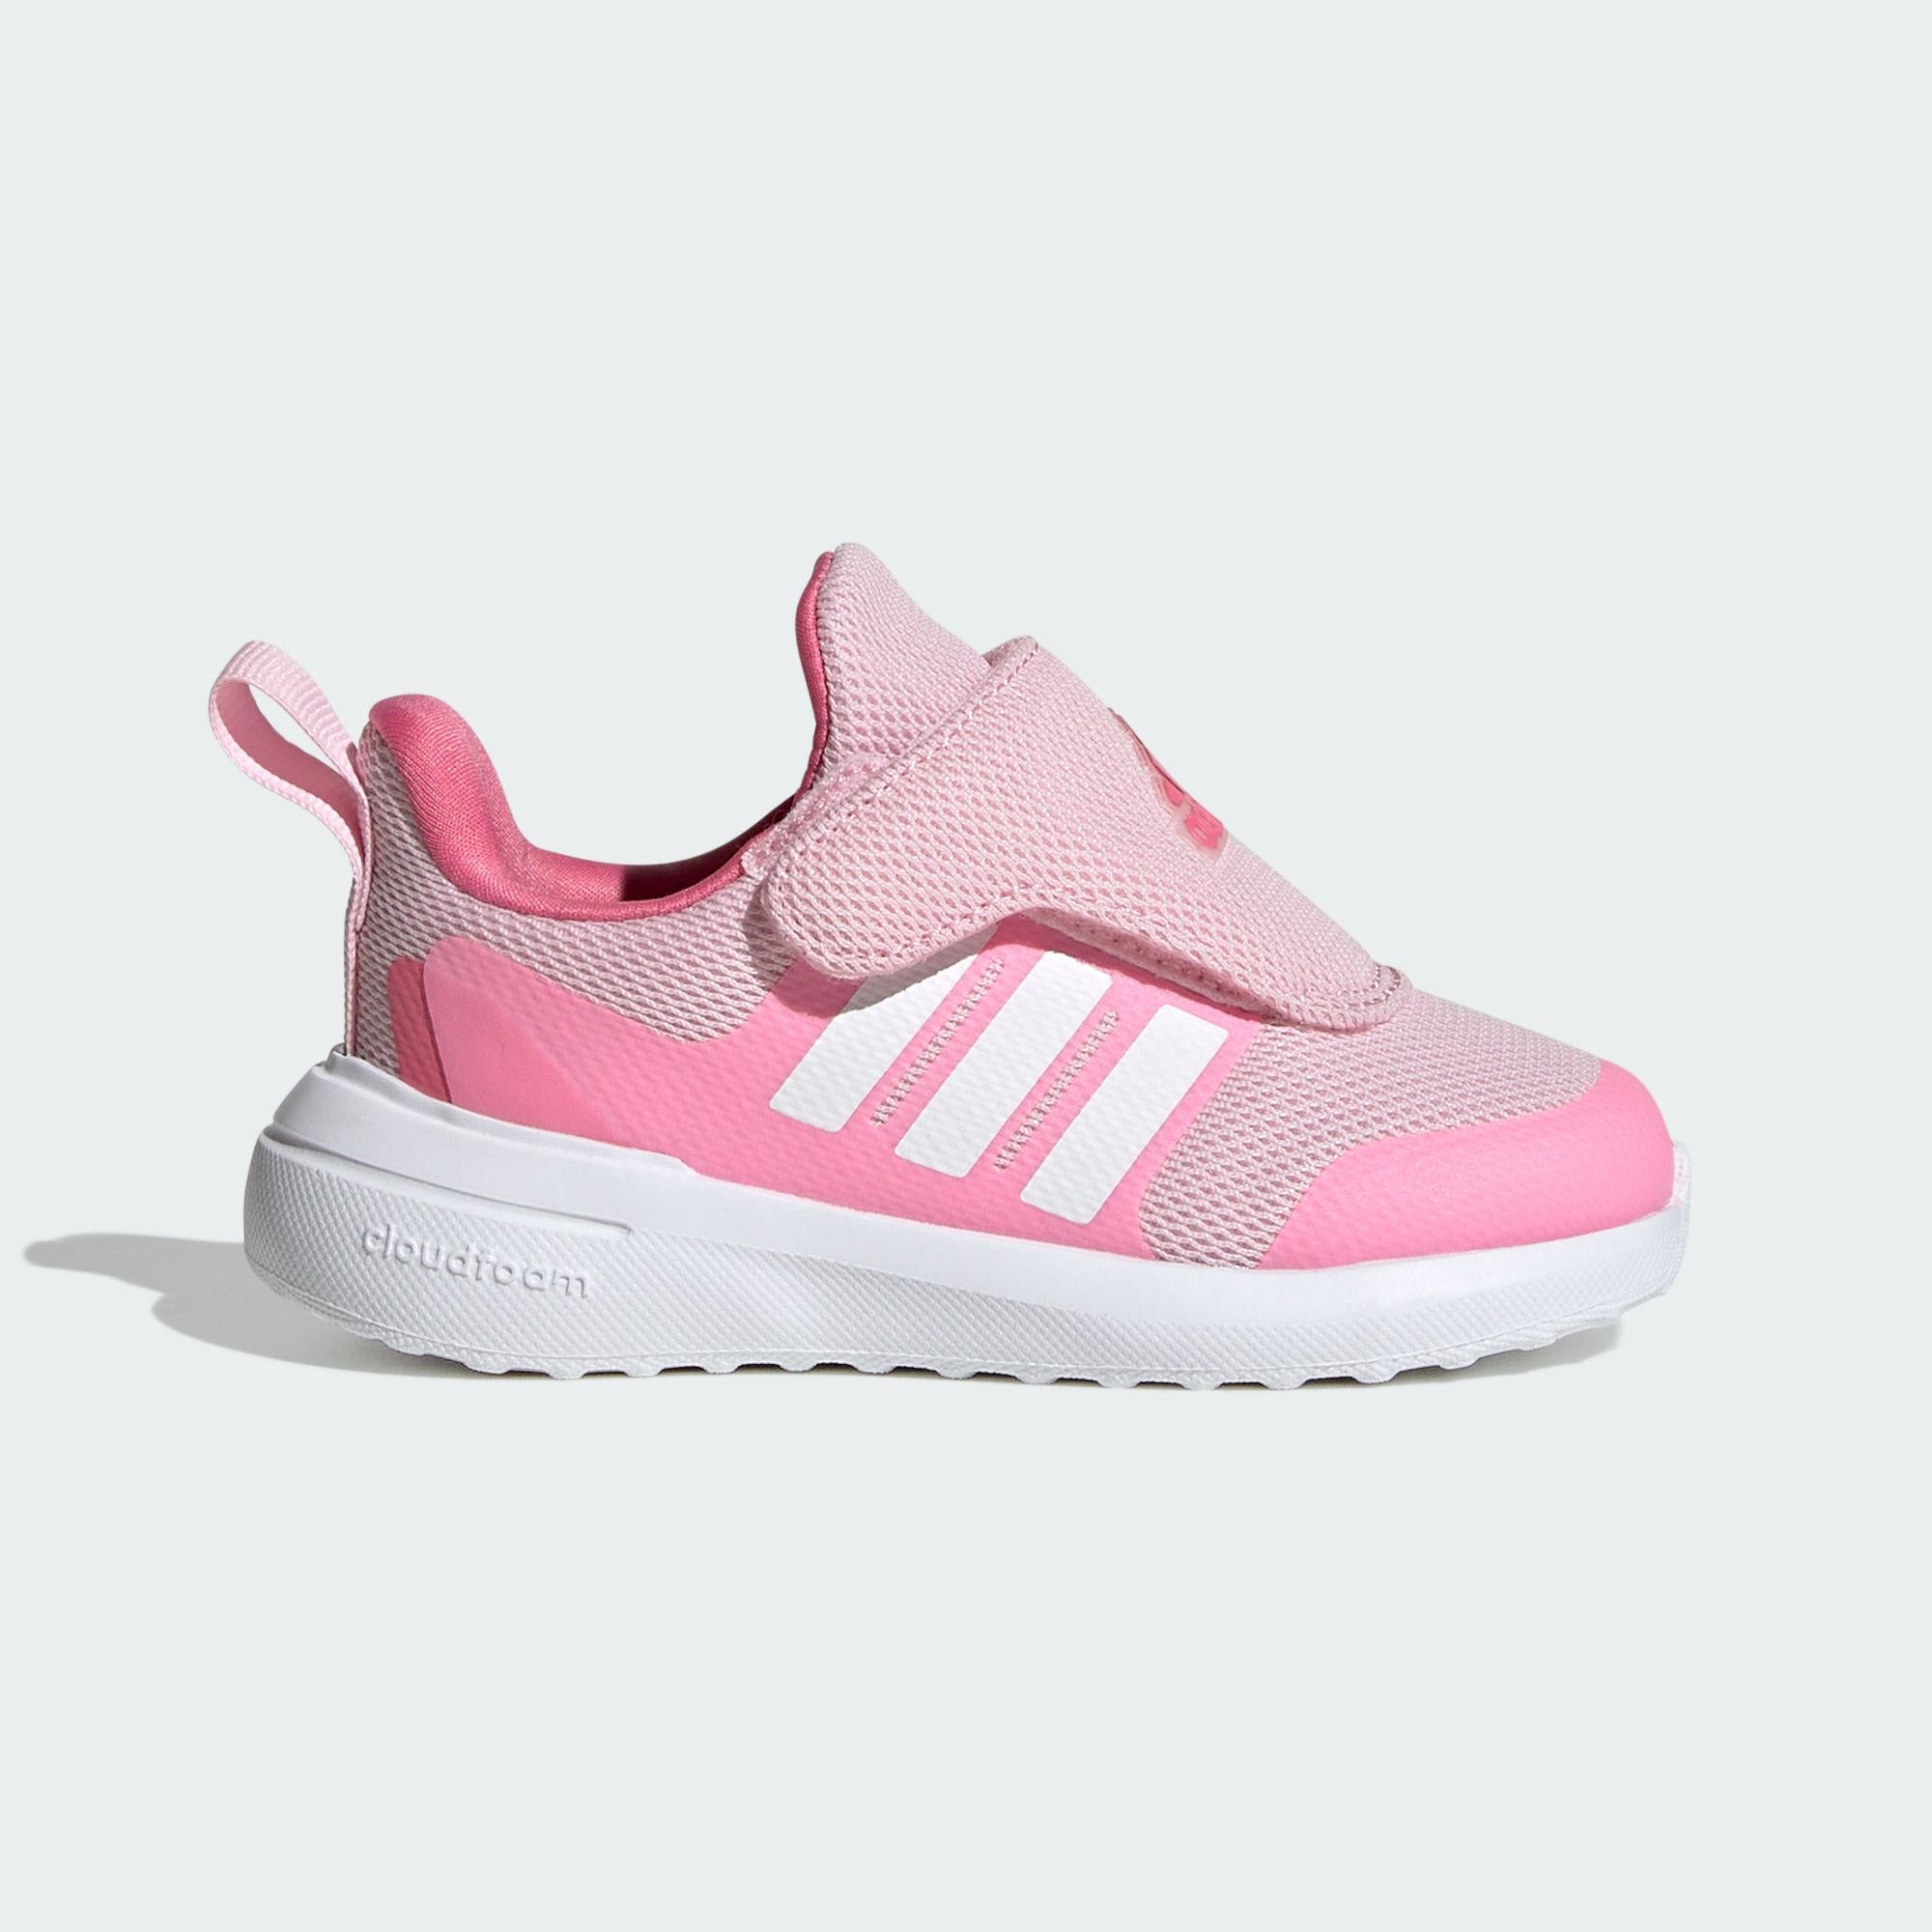  Adidas, FORTARUN,  girl, shoes,  女嬰, 嬰童, open for kids